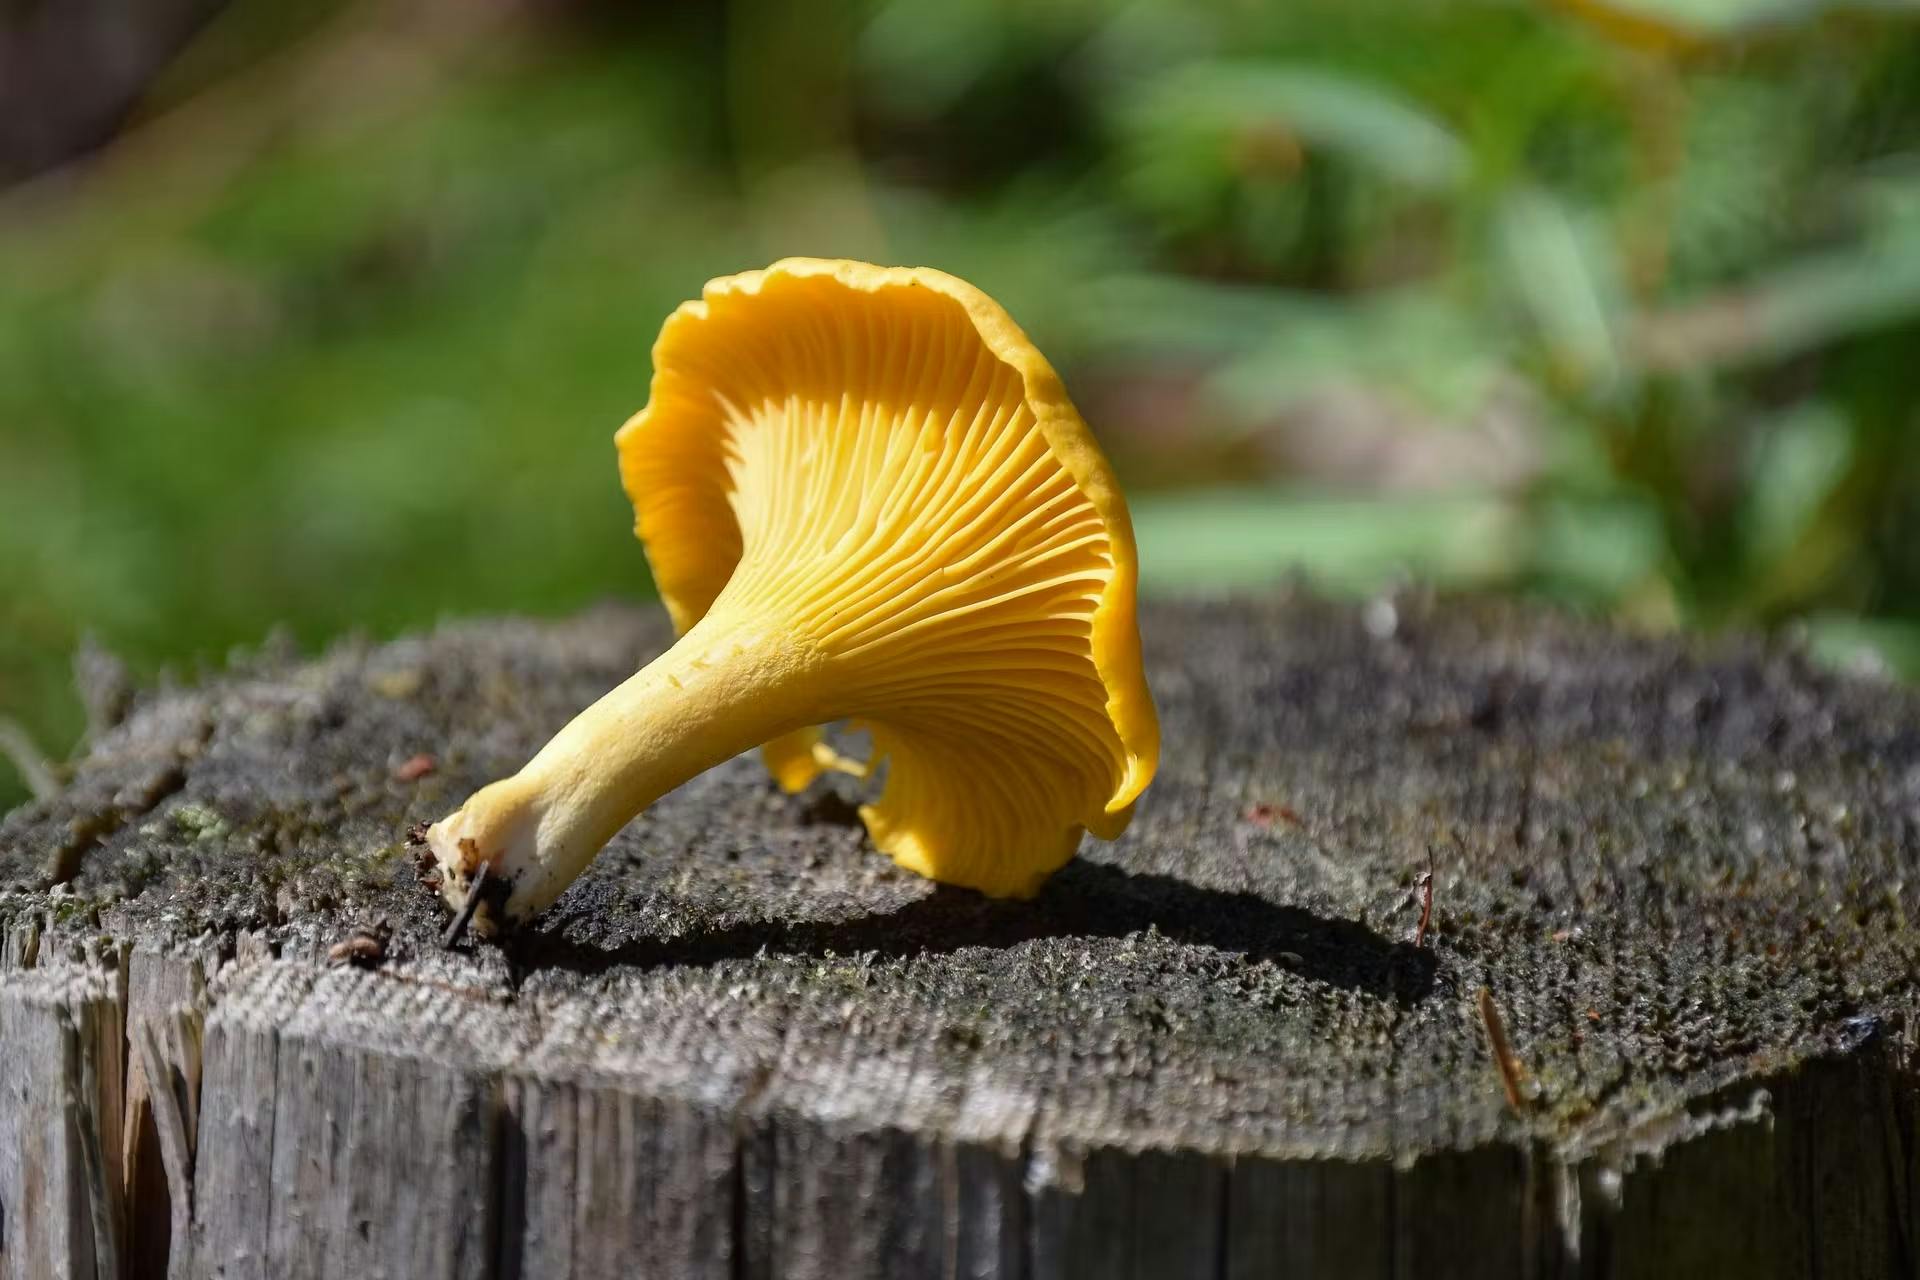 Golden Rules for a Delicious Dish: How to Cook Golden Chanterelles